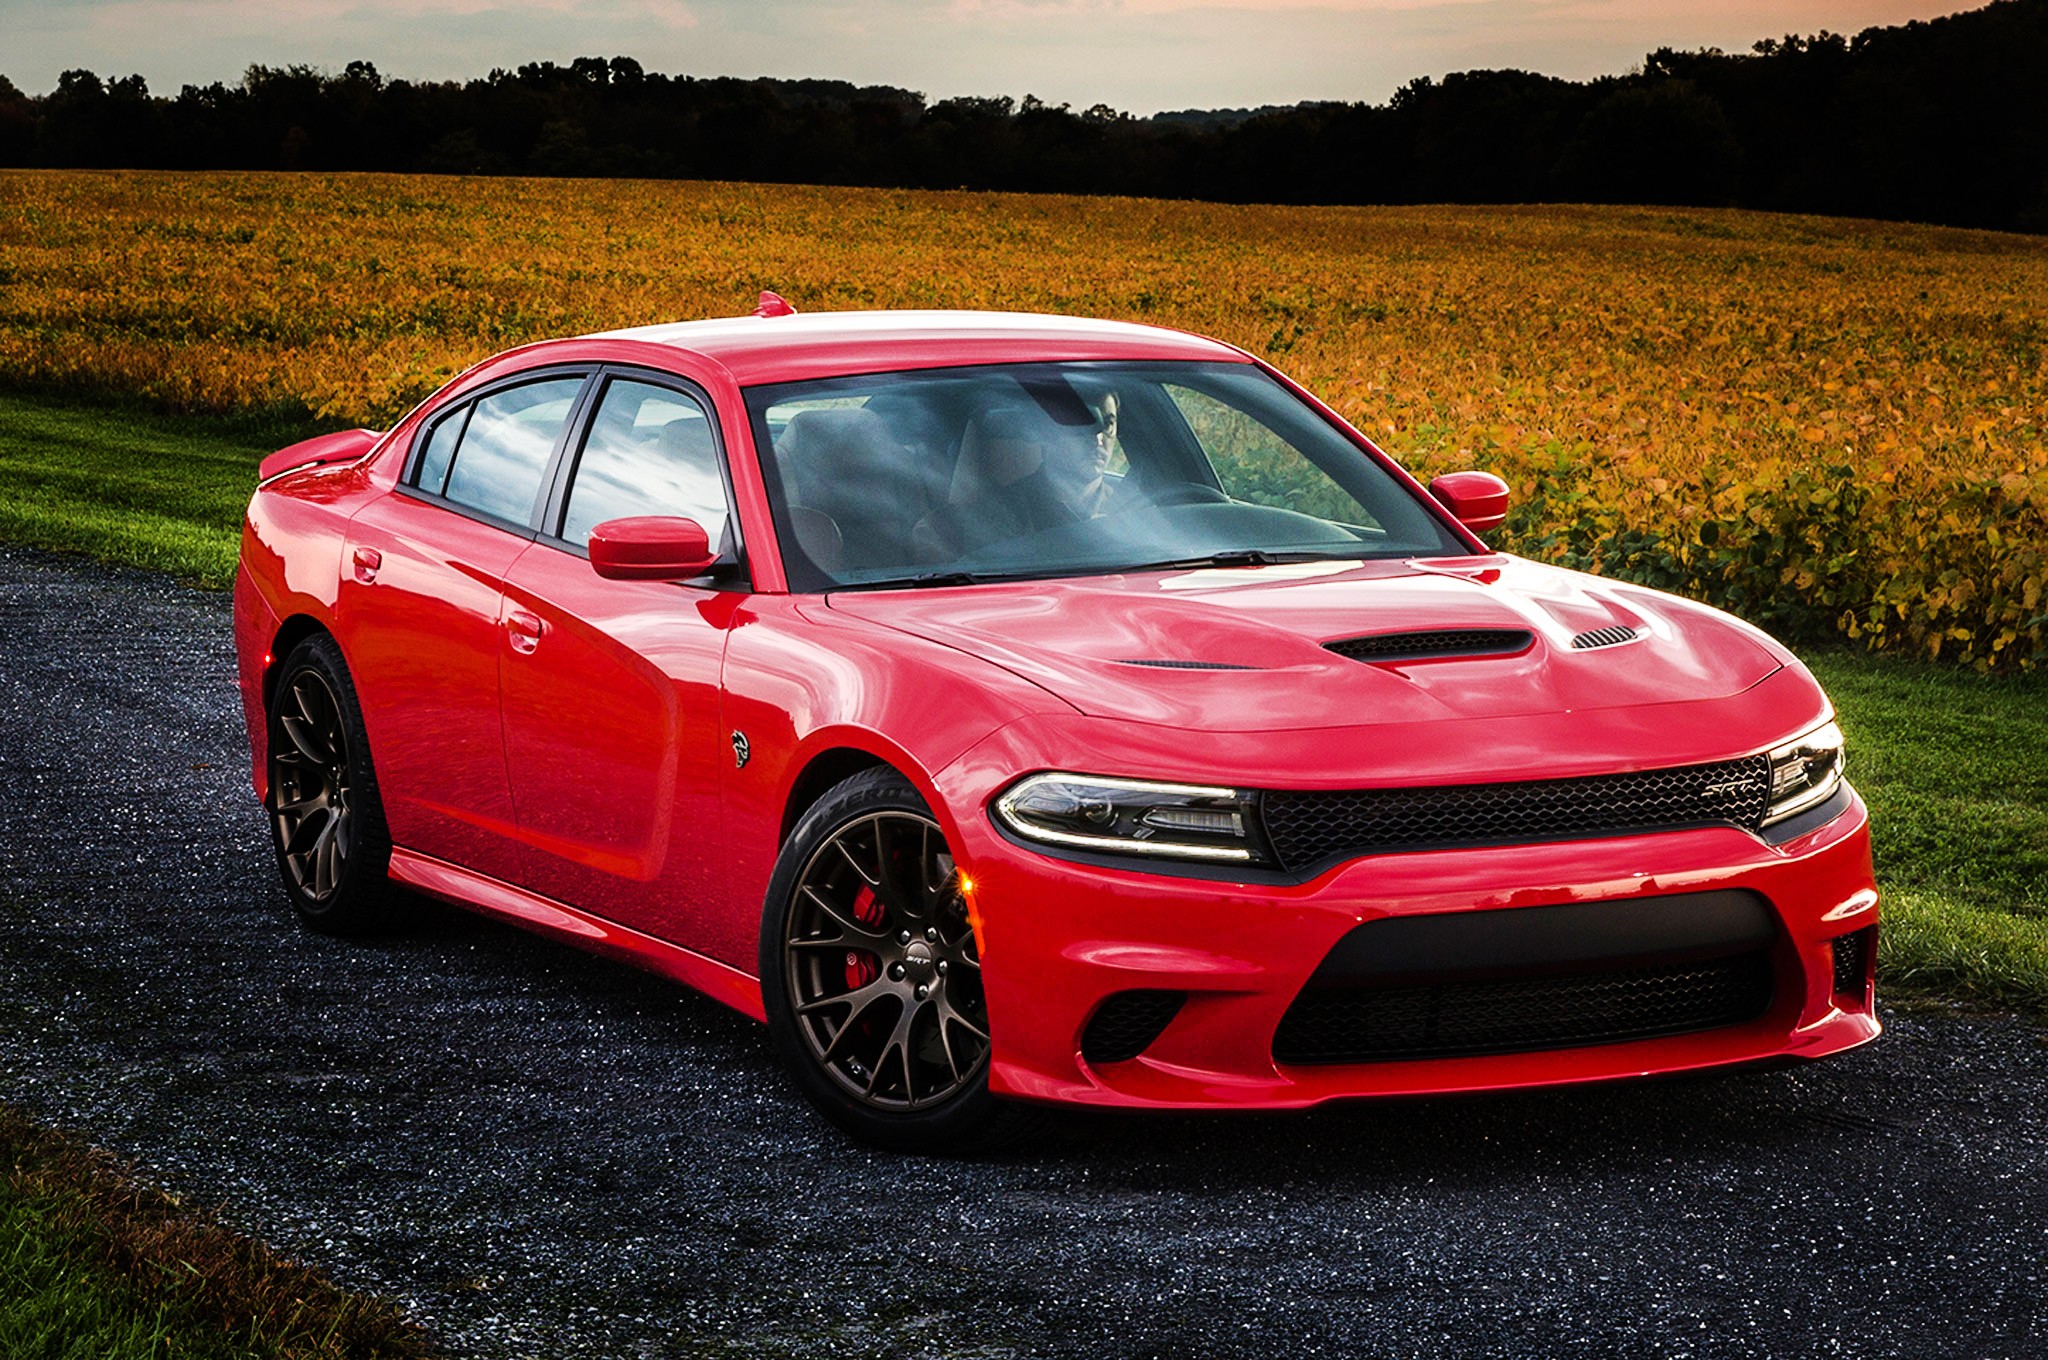 Dodge Charger Hellcat Wallpapers HD / Desktop and Mobile Backgrounds